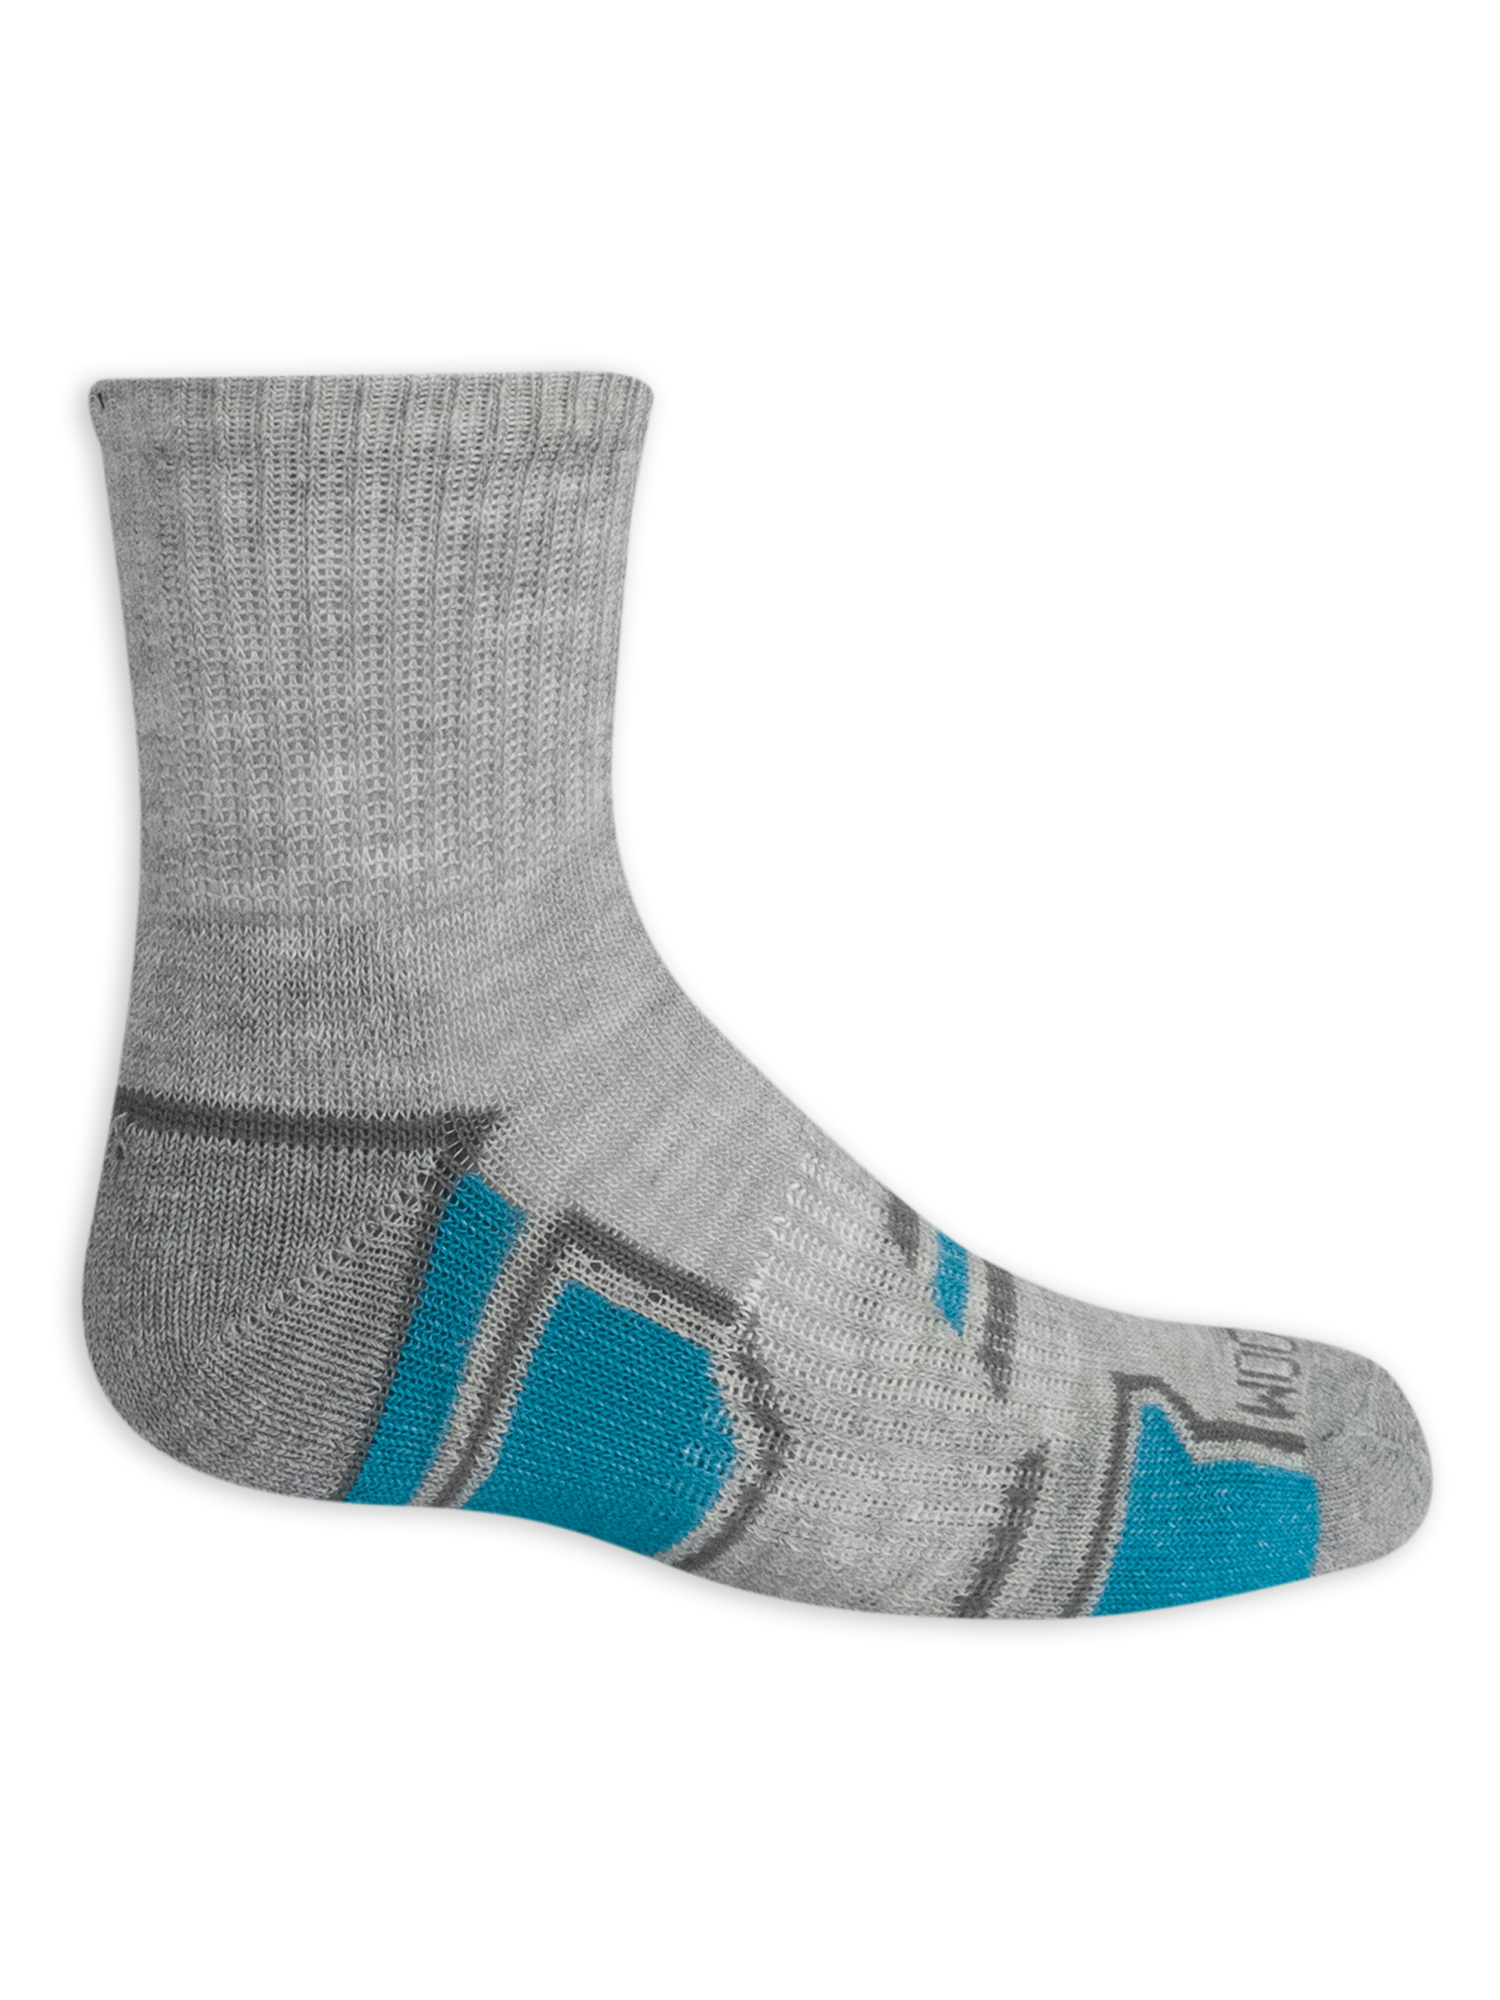 Fruit of the Loom Boys Active Ankle Socks, 12 Pack - image 4 of 5